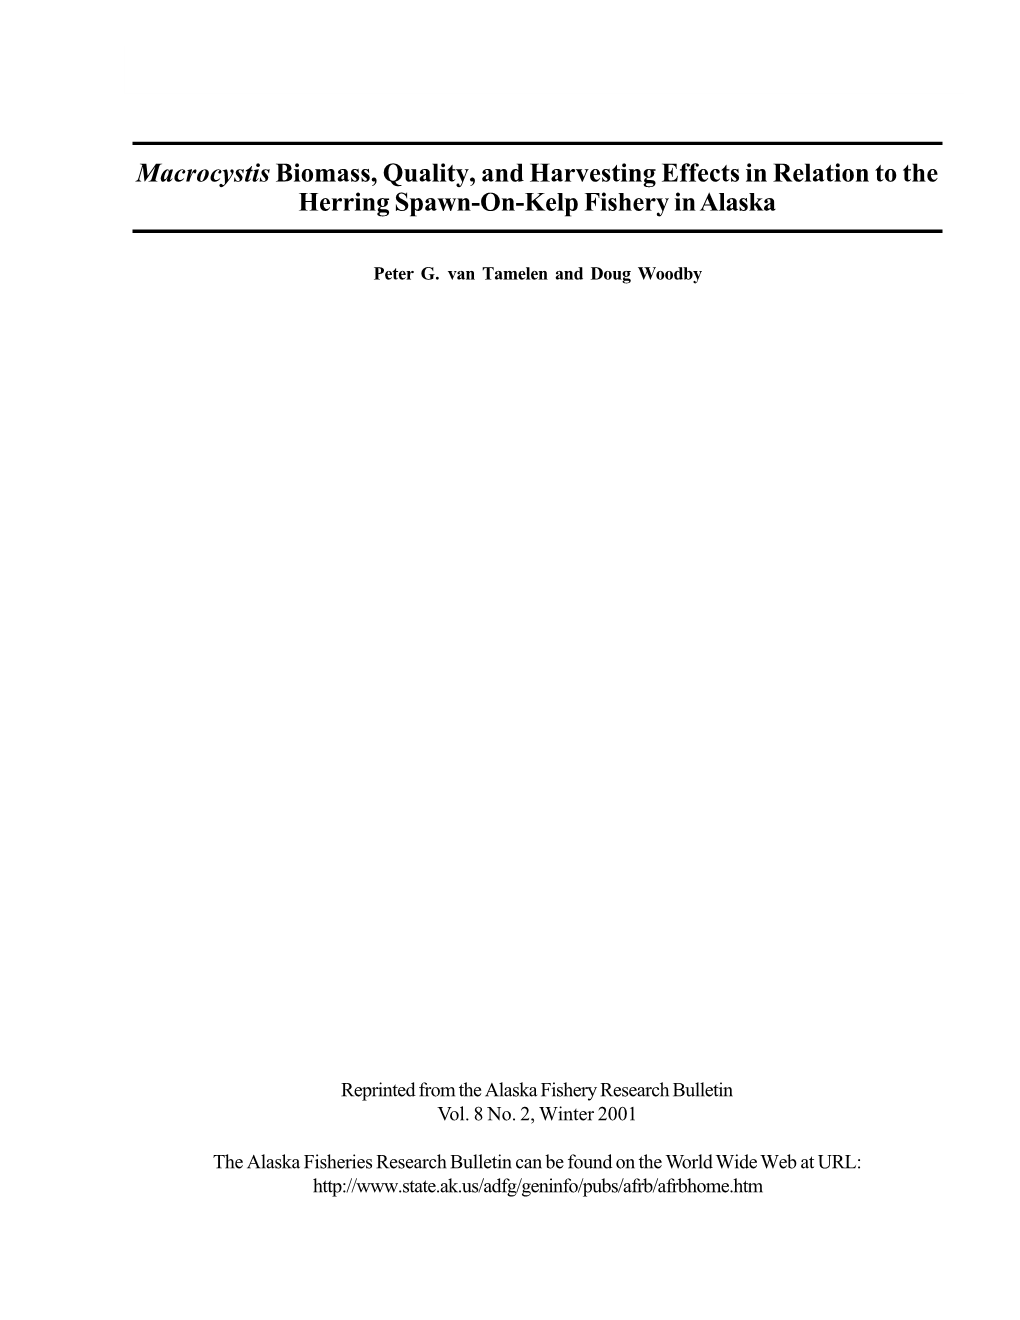 Macrocystis Biomass, Quality, and Harvesting Effects in the Relation To